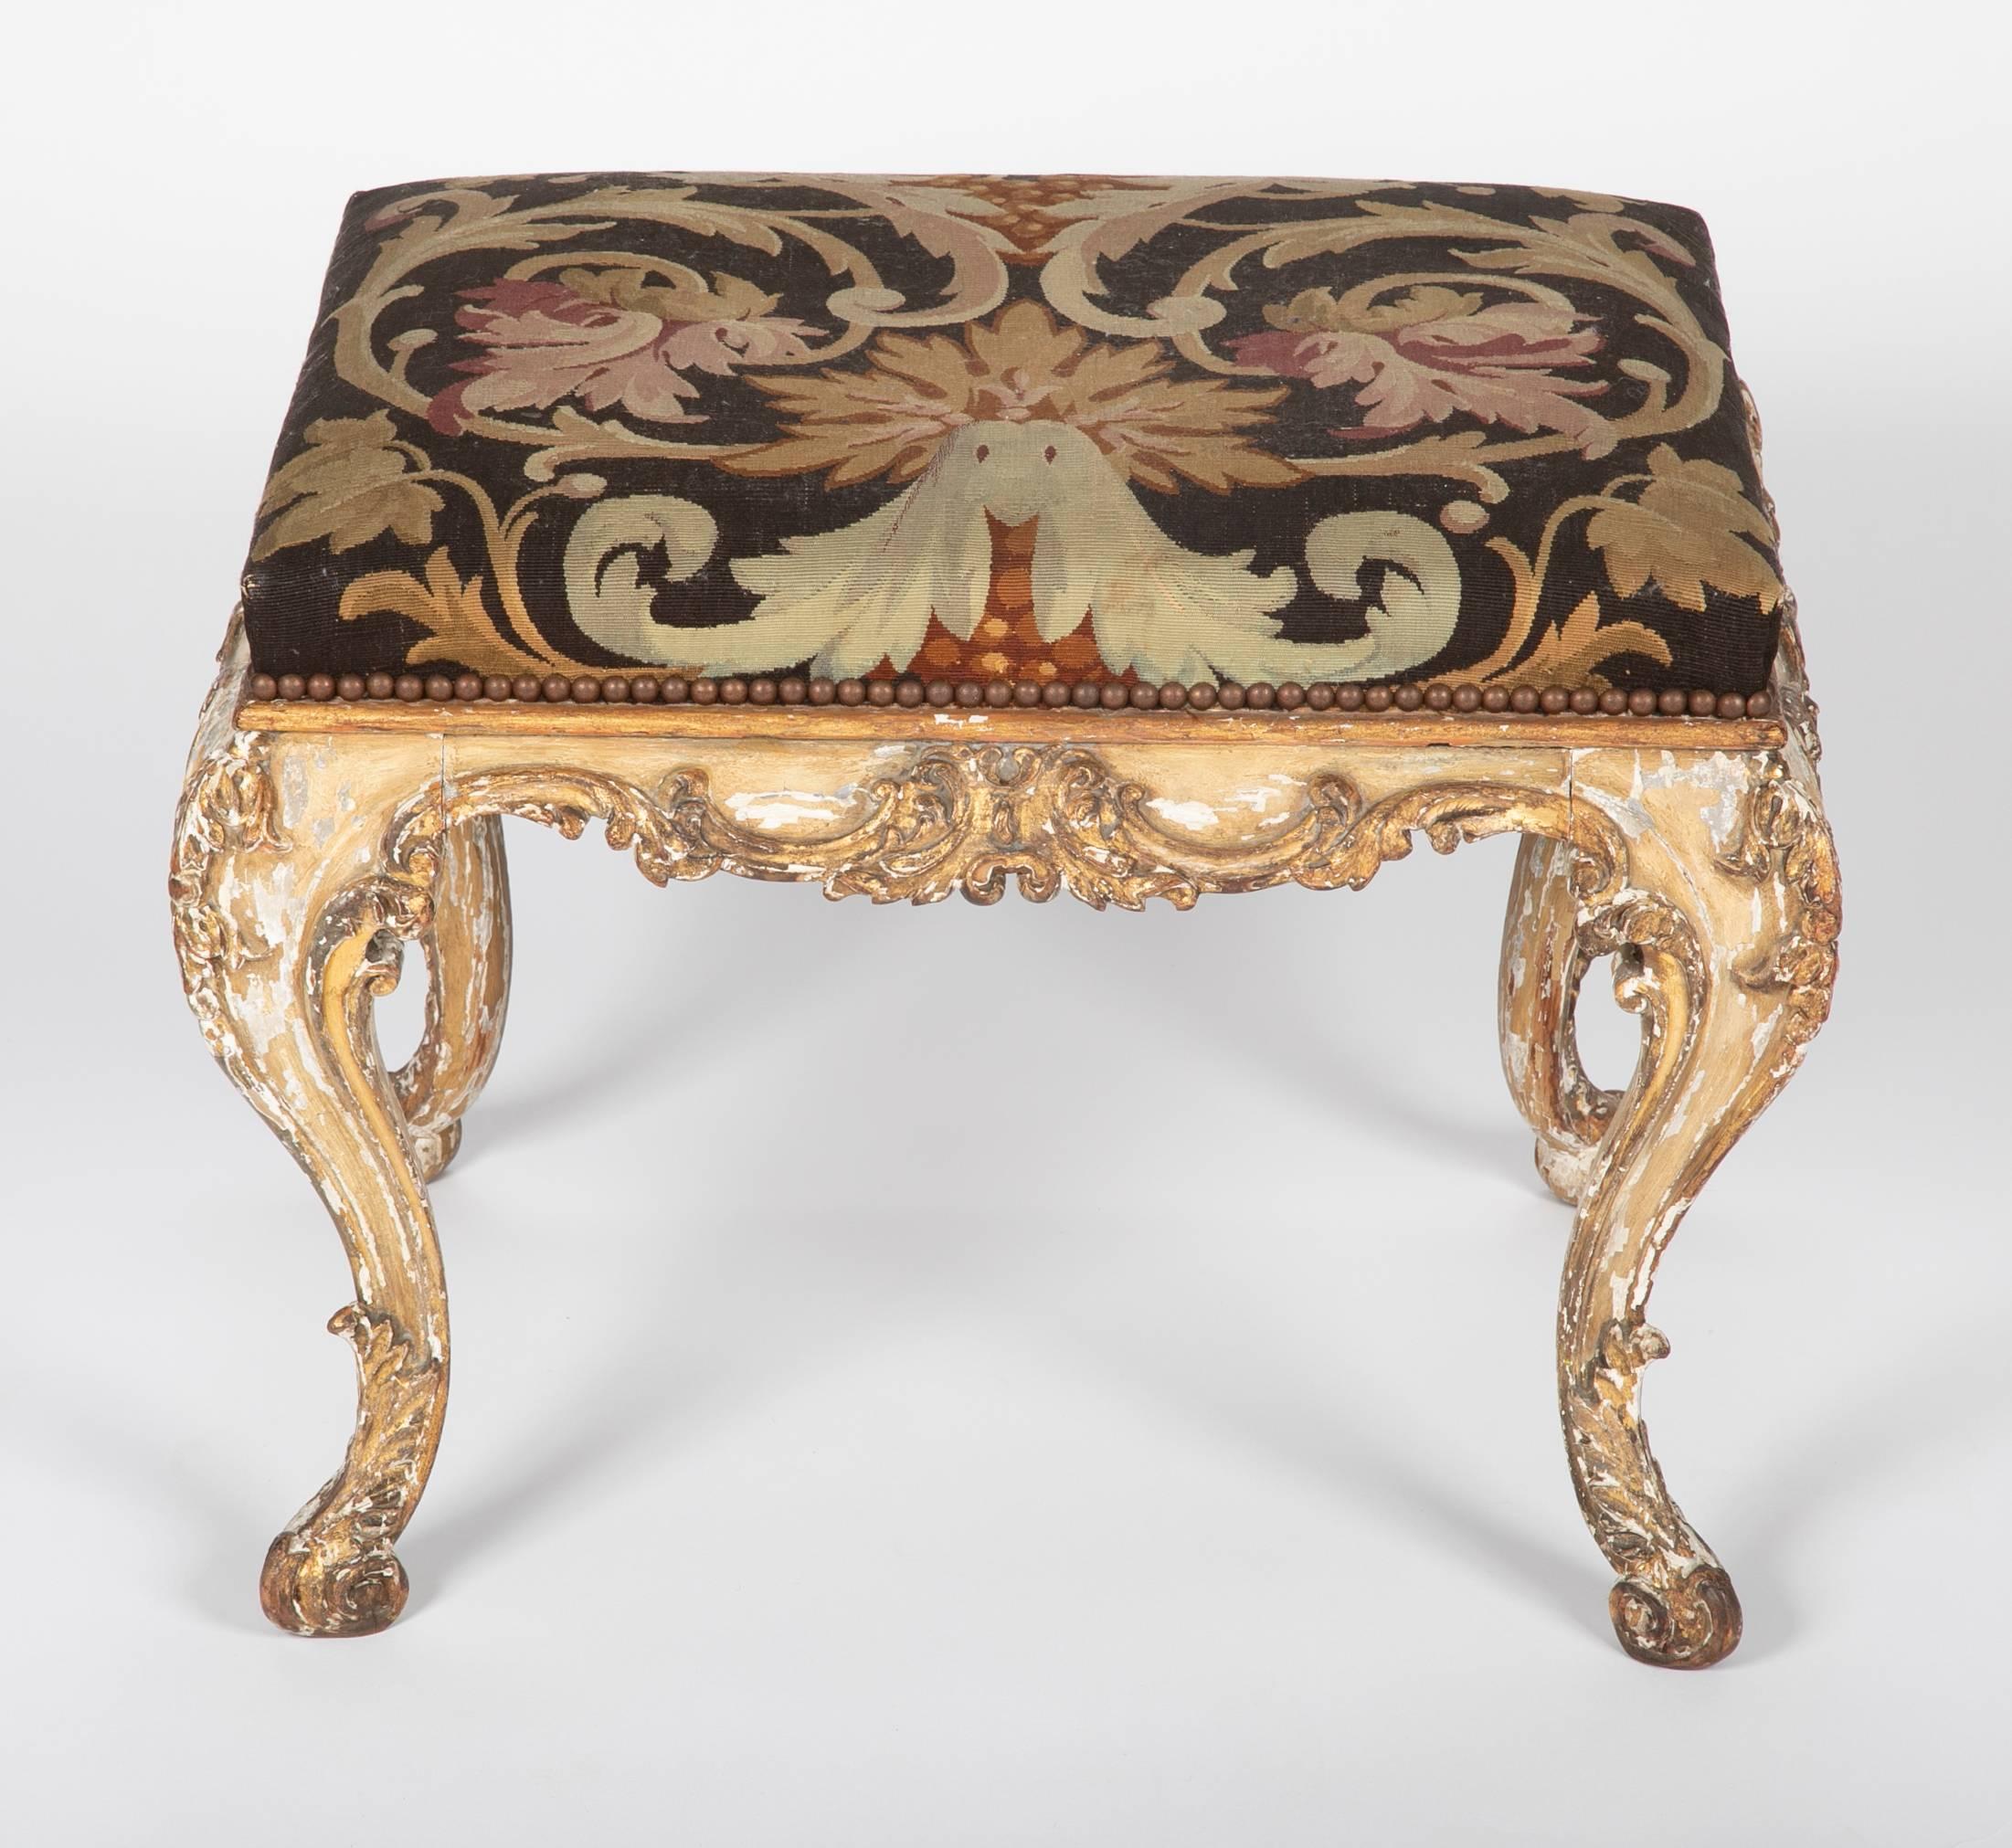 A fine Louis XV style French painted and gilt stool with Aubusson upholstery with brass tacks. On four cabriole legs with raised Rococo gilded carving over a cream colored paint. A very handsome piece. Very nice scale at almost 2 feet wide. (23 w by